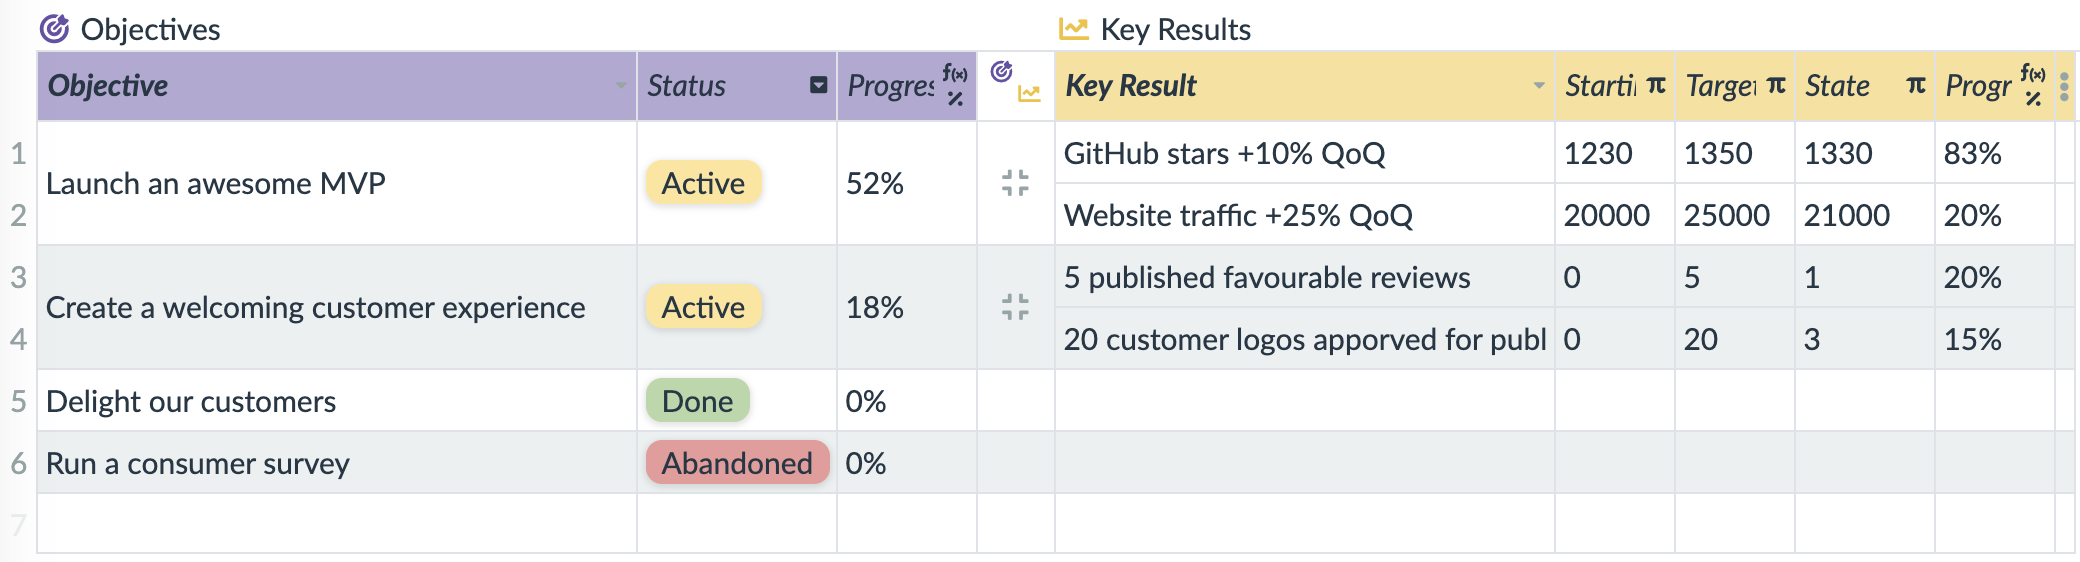 objectives - key results, OKRs in the remote work template